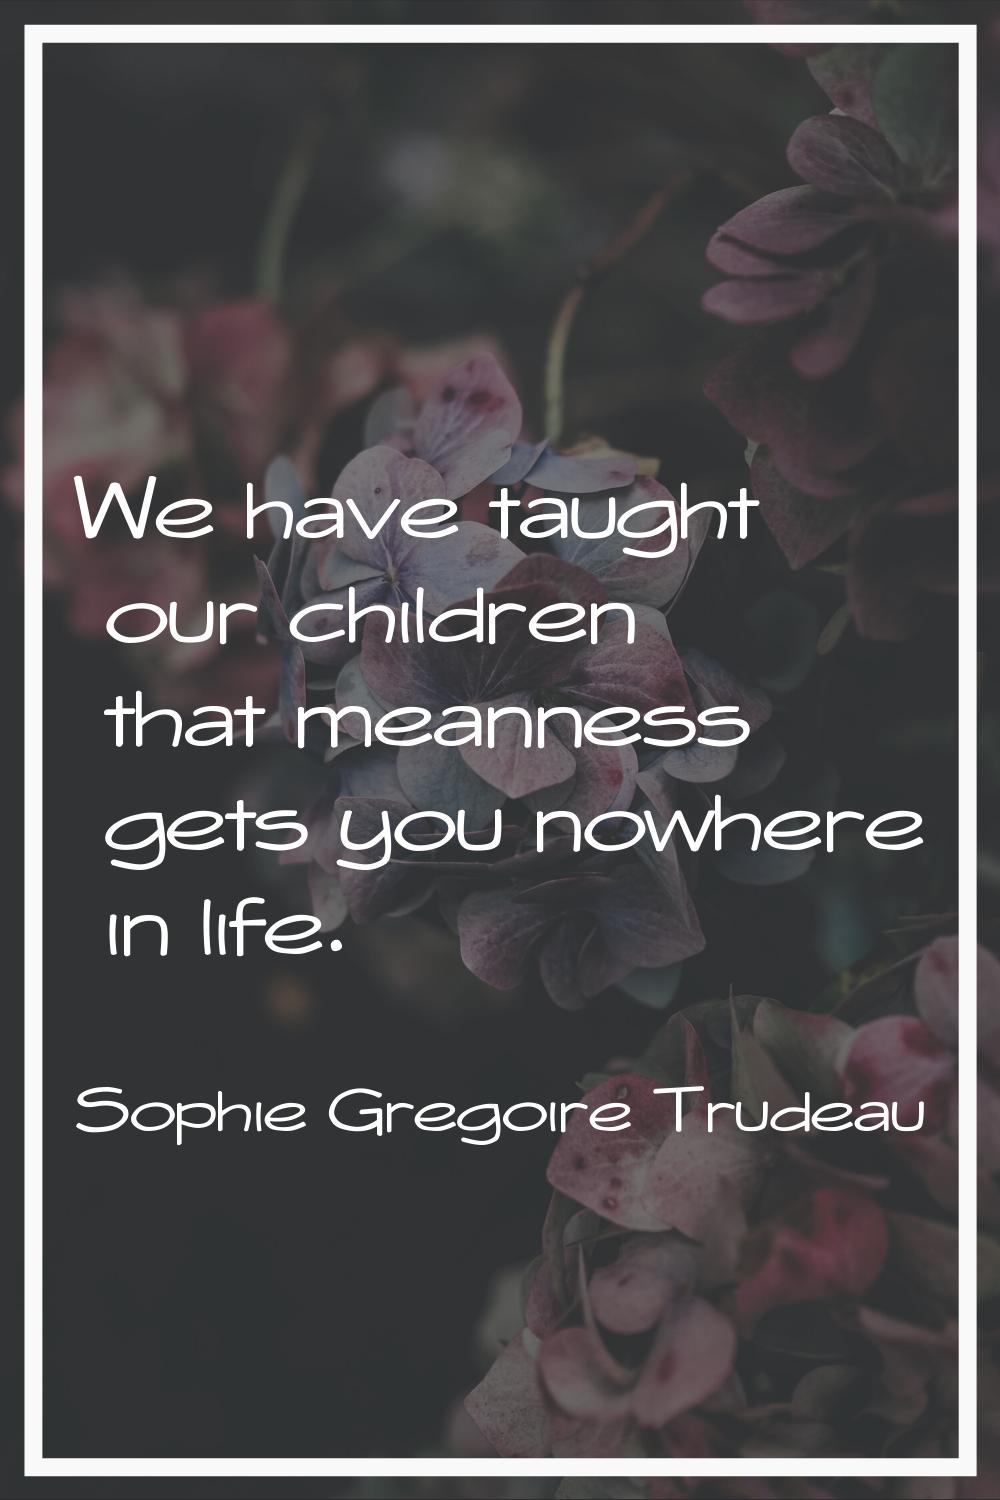 We have taught our children that meanness gets you nowhere in life.